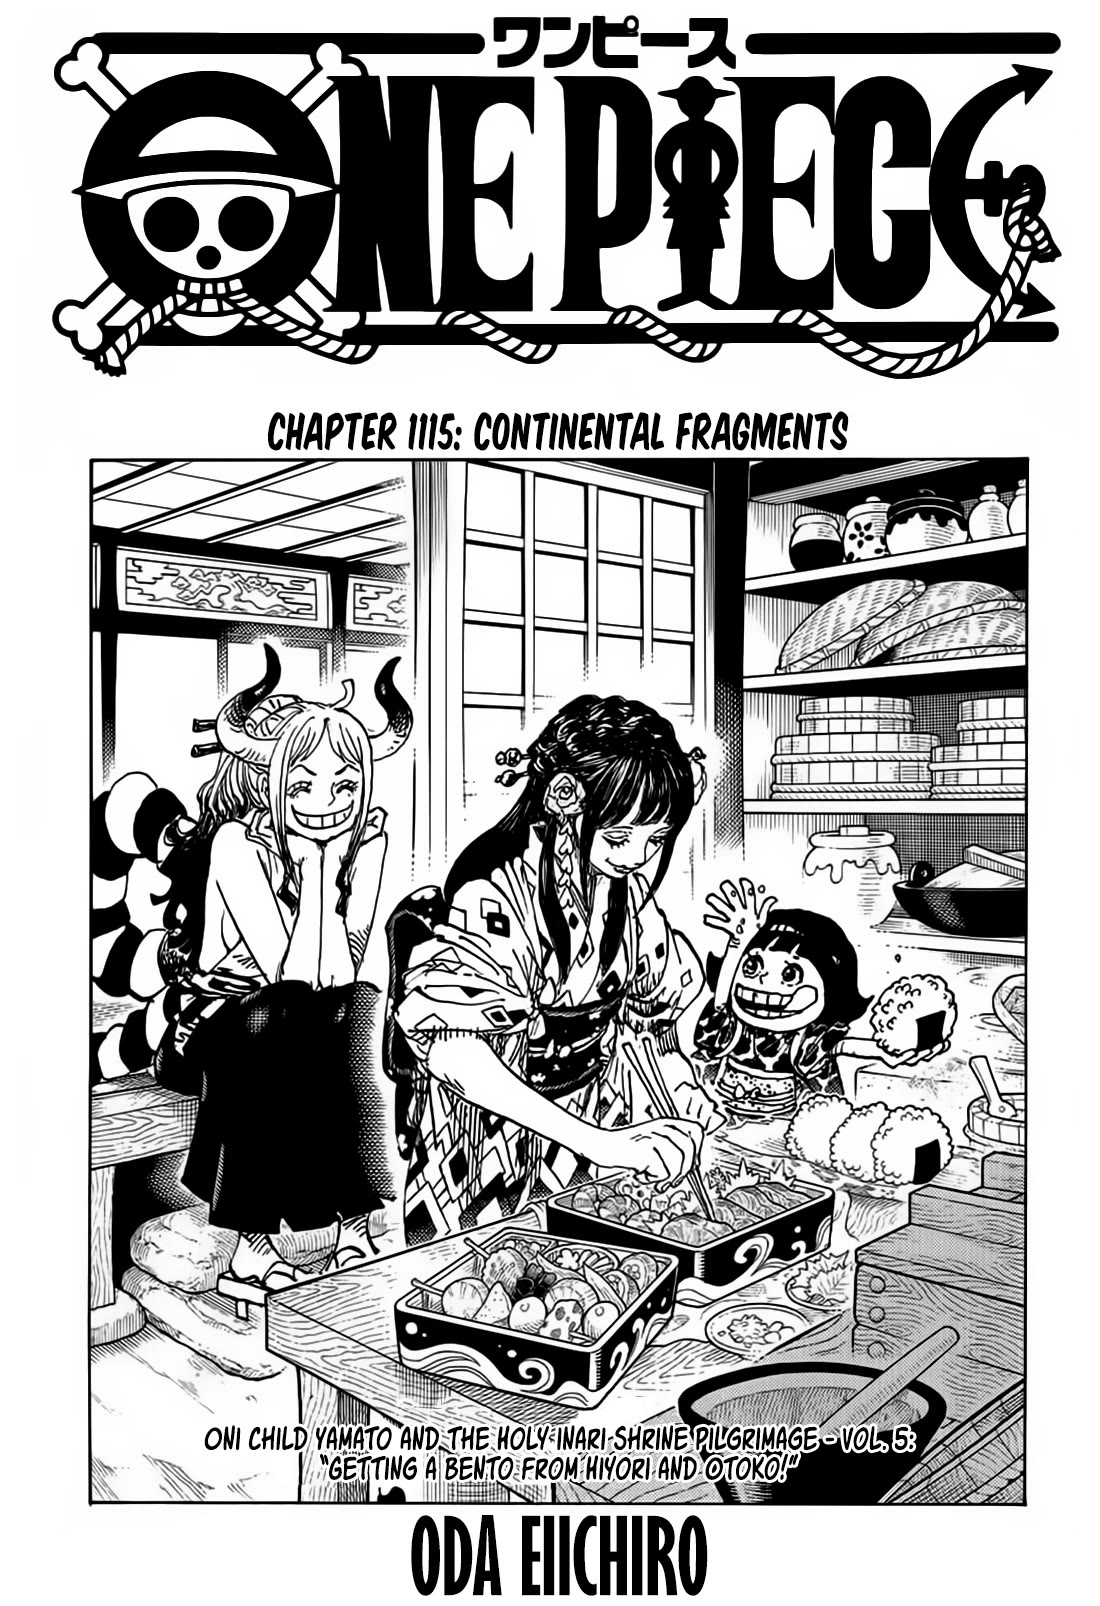 One Piece, Chapter 1115 image 01